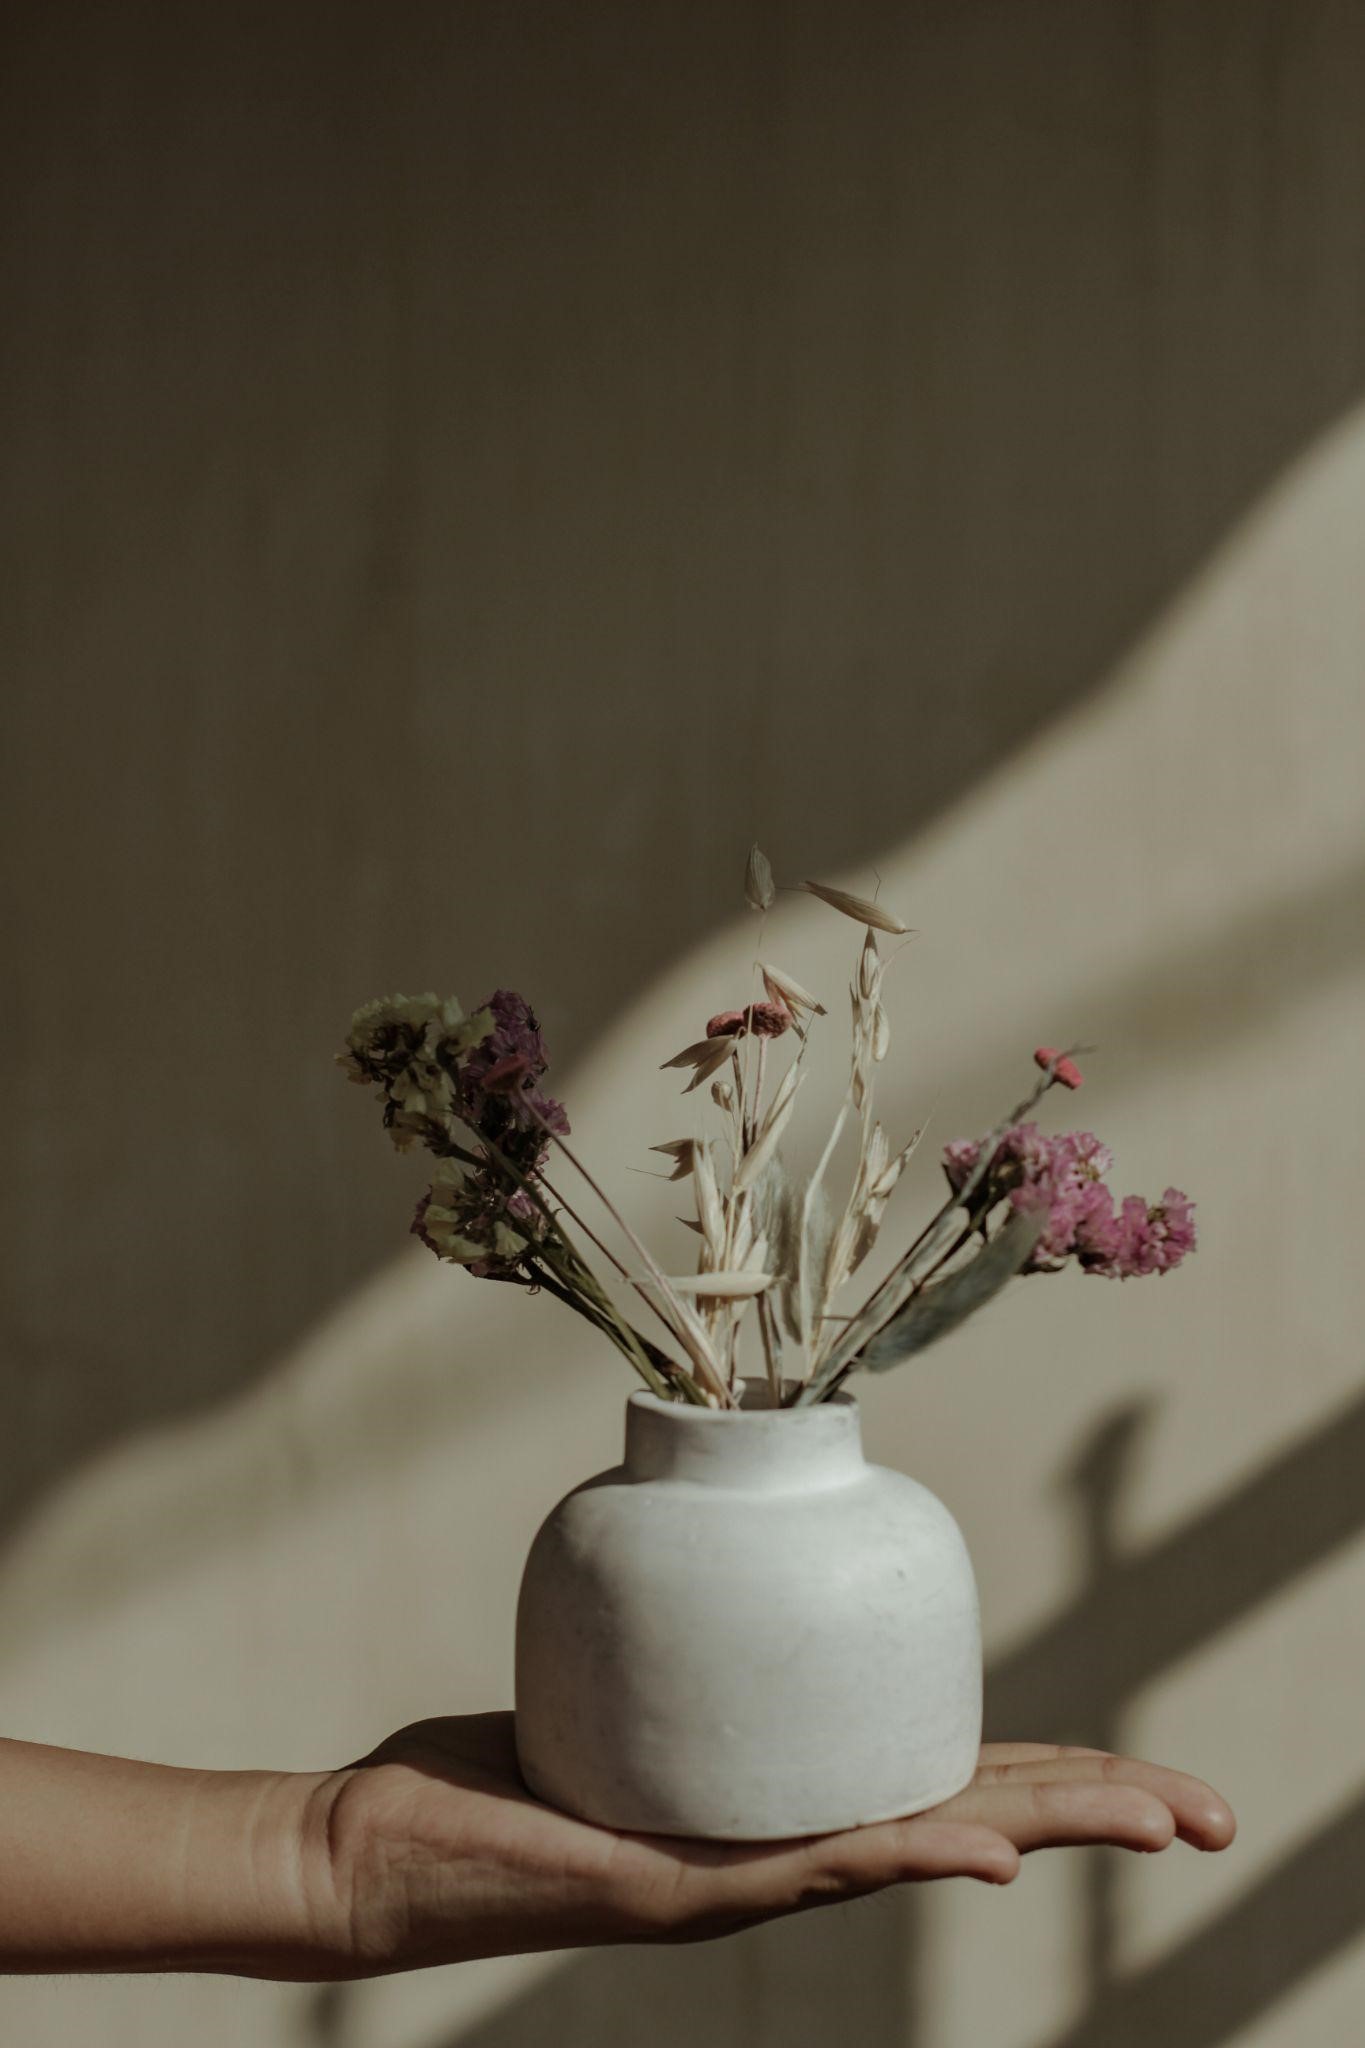 Pollen-free artificial flowers in a beautiful vase.